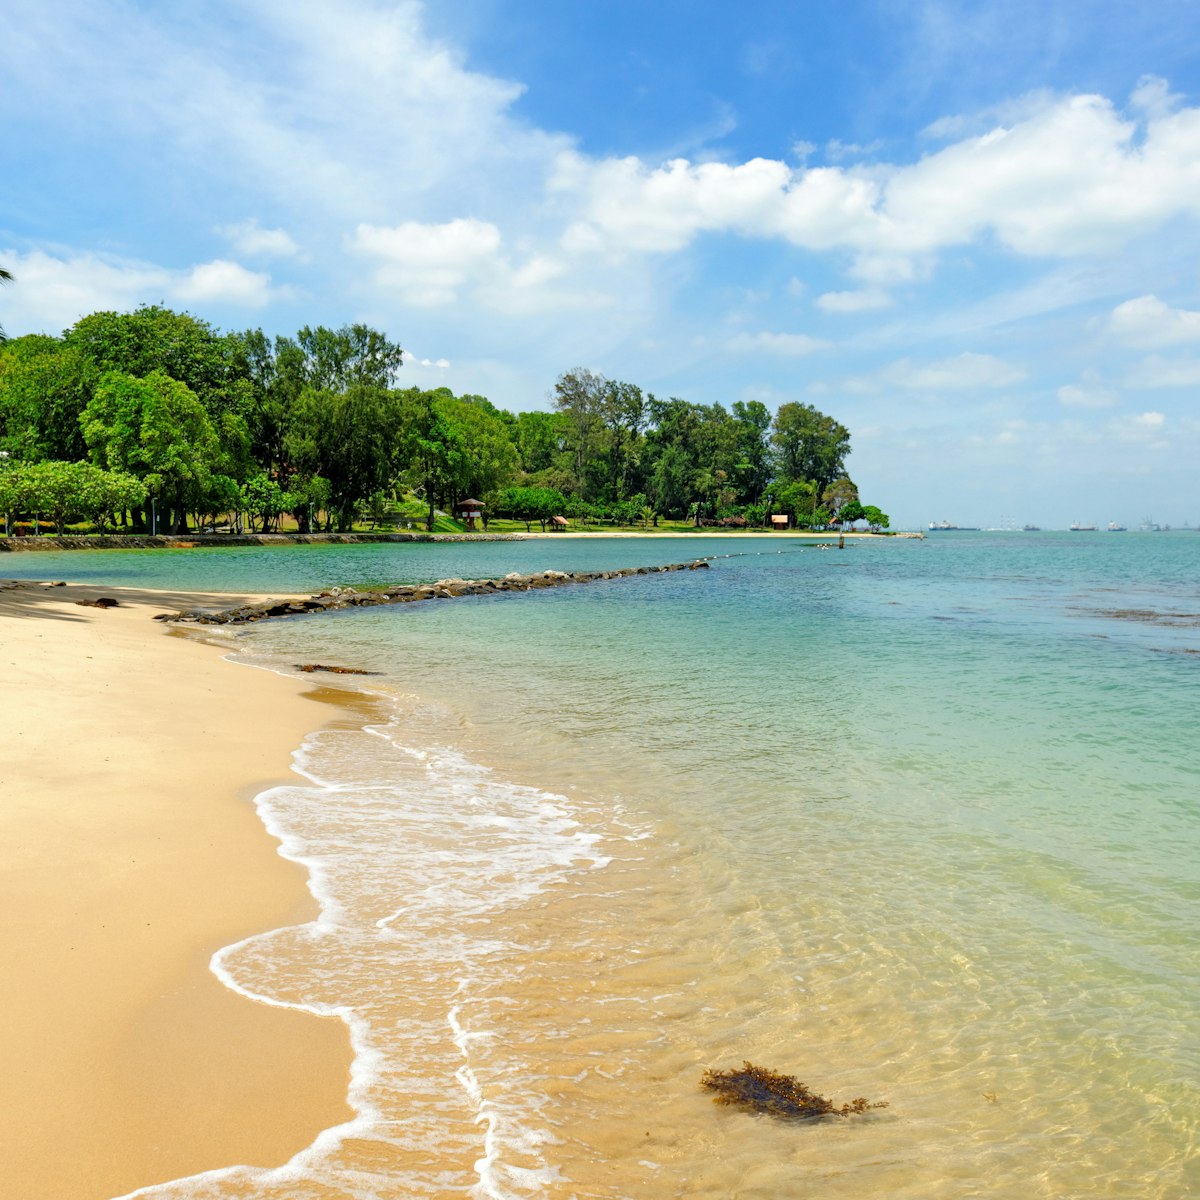 Clear blue sea and tropical sandy beach of St John Island, Singapore; Shutterstock ID 127867628; Your name (First / Last): Josh Vogel; Project no. or GL code: 56530; Network activity no. or Cost Centre: Online-Design; Product or Project: 65050/7529/Josh Vogel/LP.com Destination Galleries